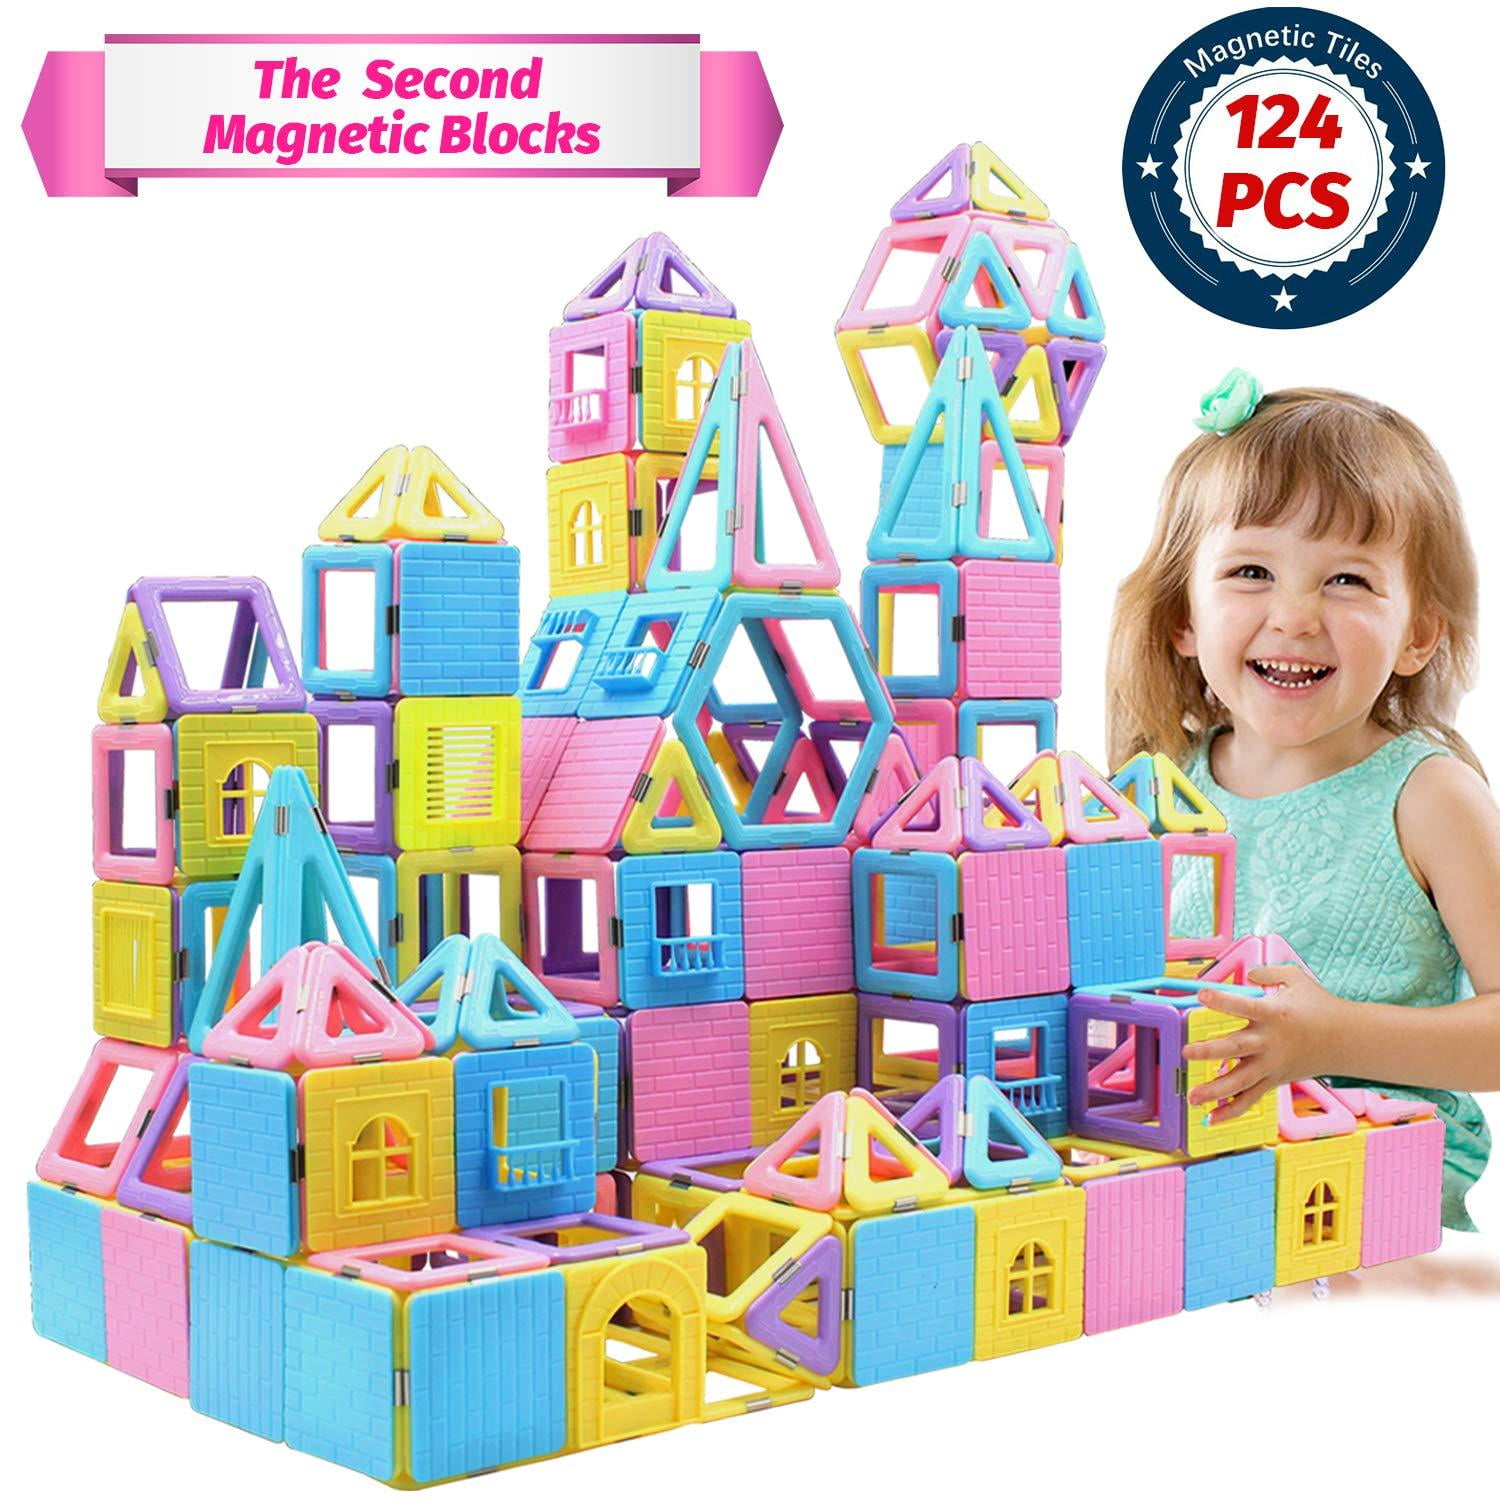 HOMOFY 60pc Castle Magnetic Blocks Learning & Development Magnetic Tiles Blocks with Candy Color 3D Magnet Toys STEM Educational Kids Toys for 3 4 5 6 7 Years Old Girls Boys Toddlers Gifts